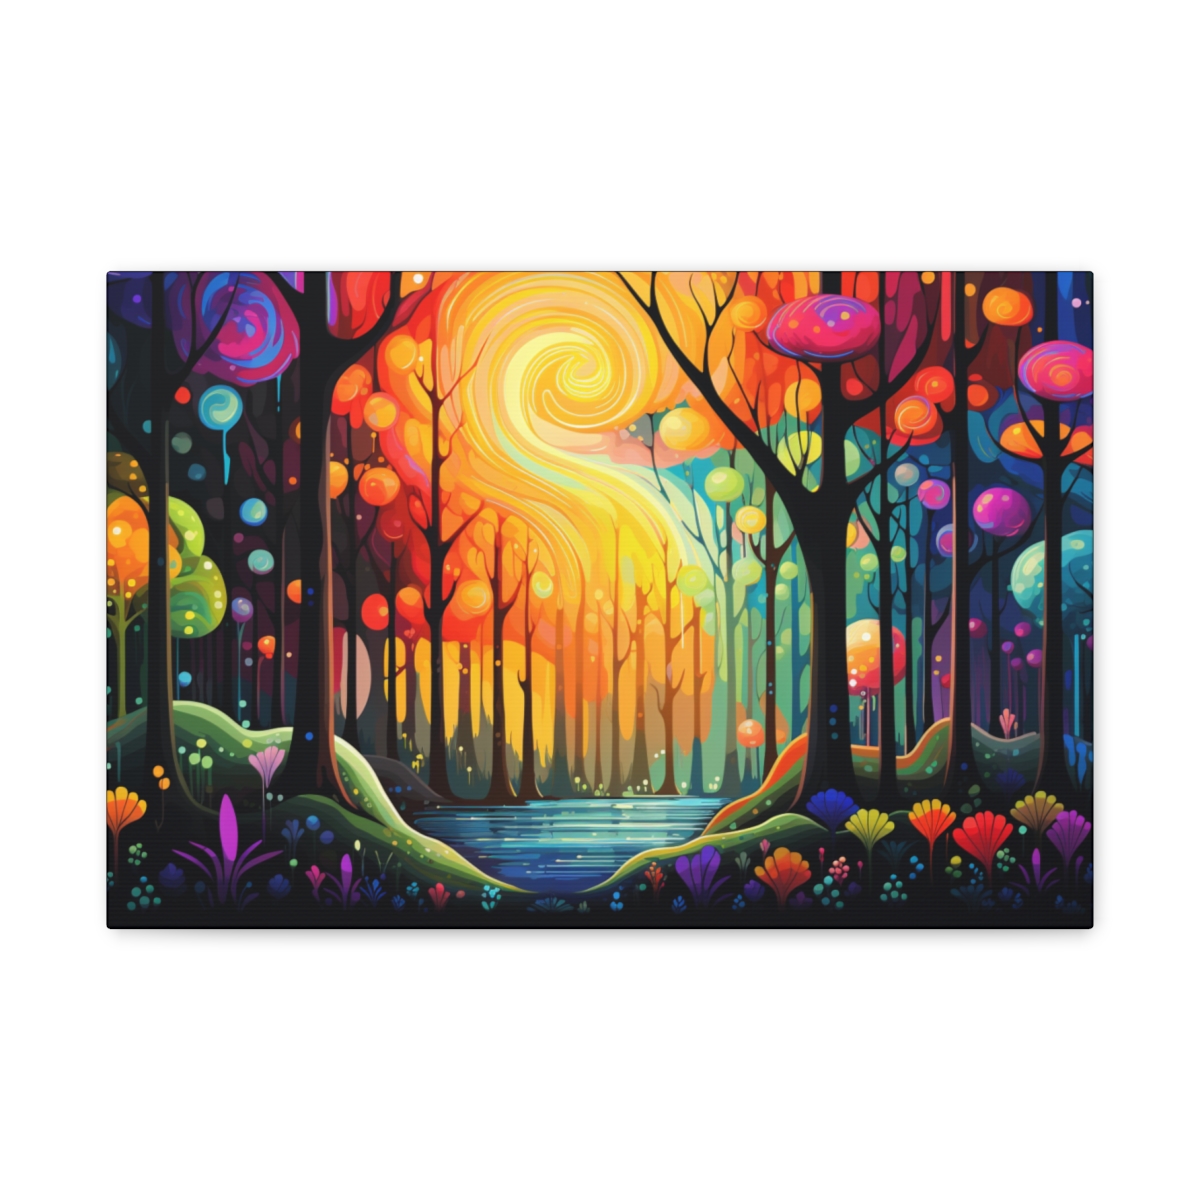 Forest Art Canvas Print: Glowing Souls